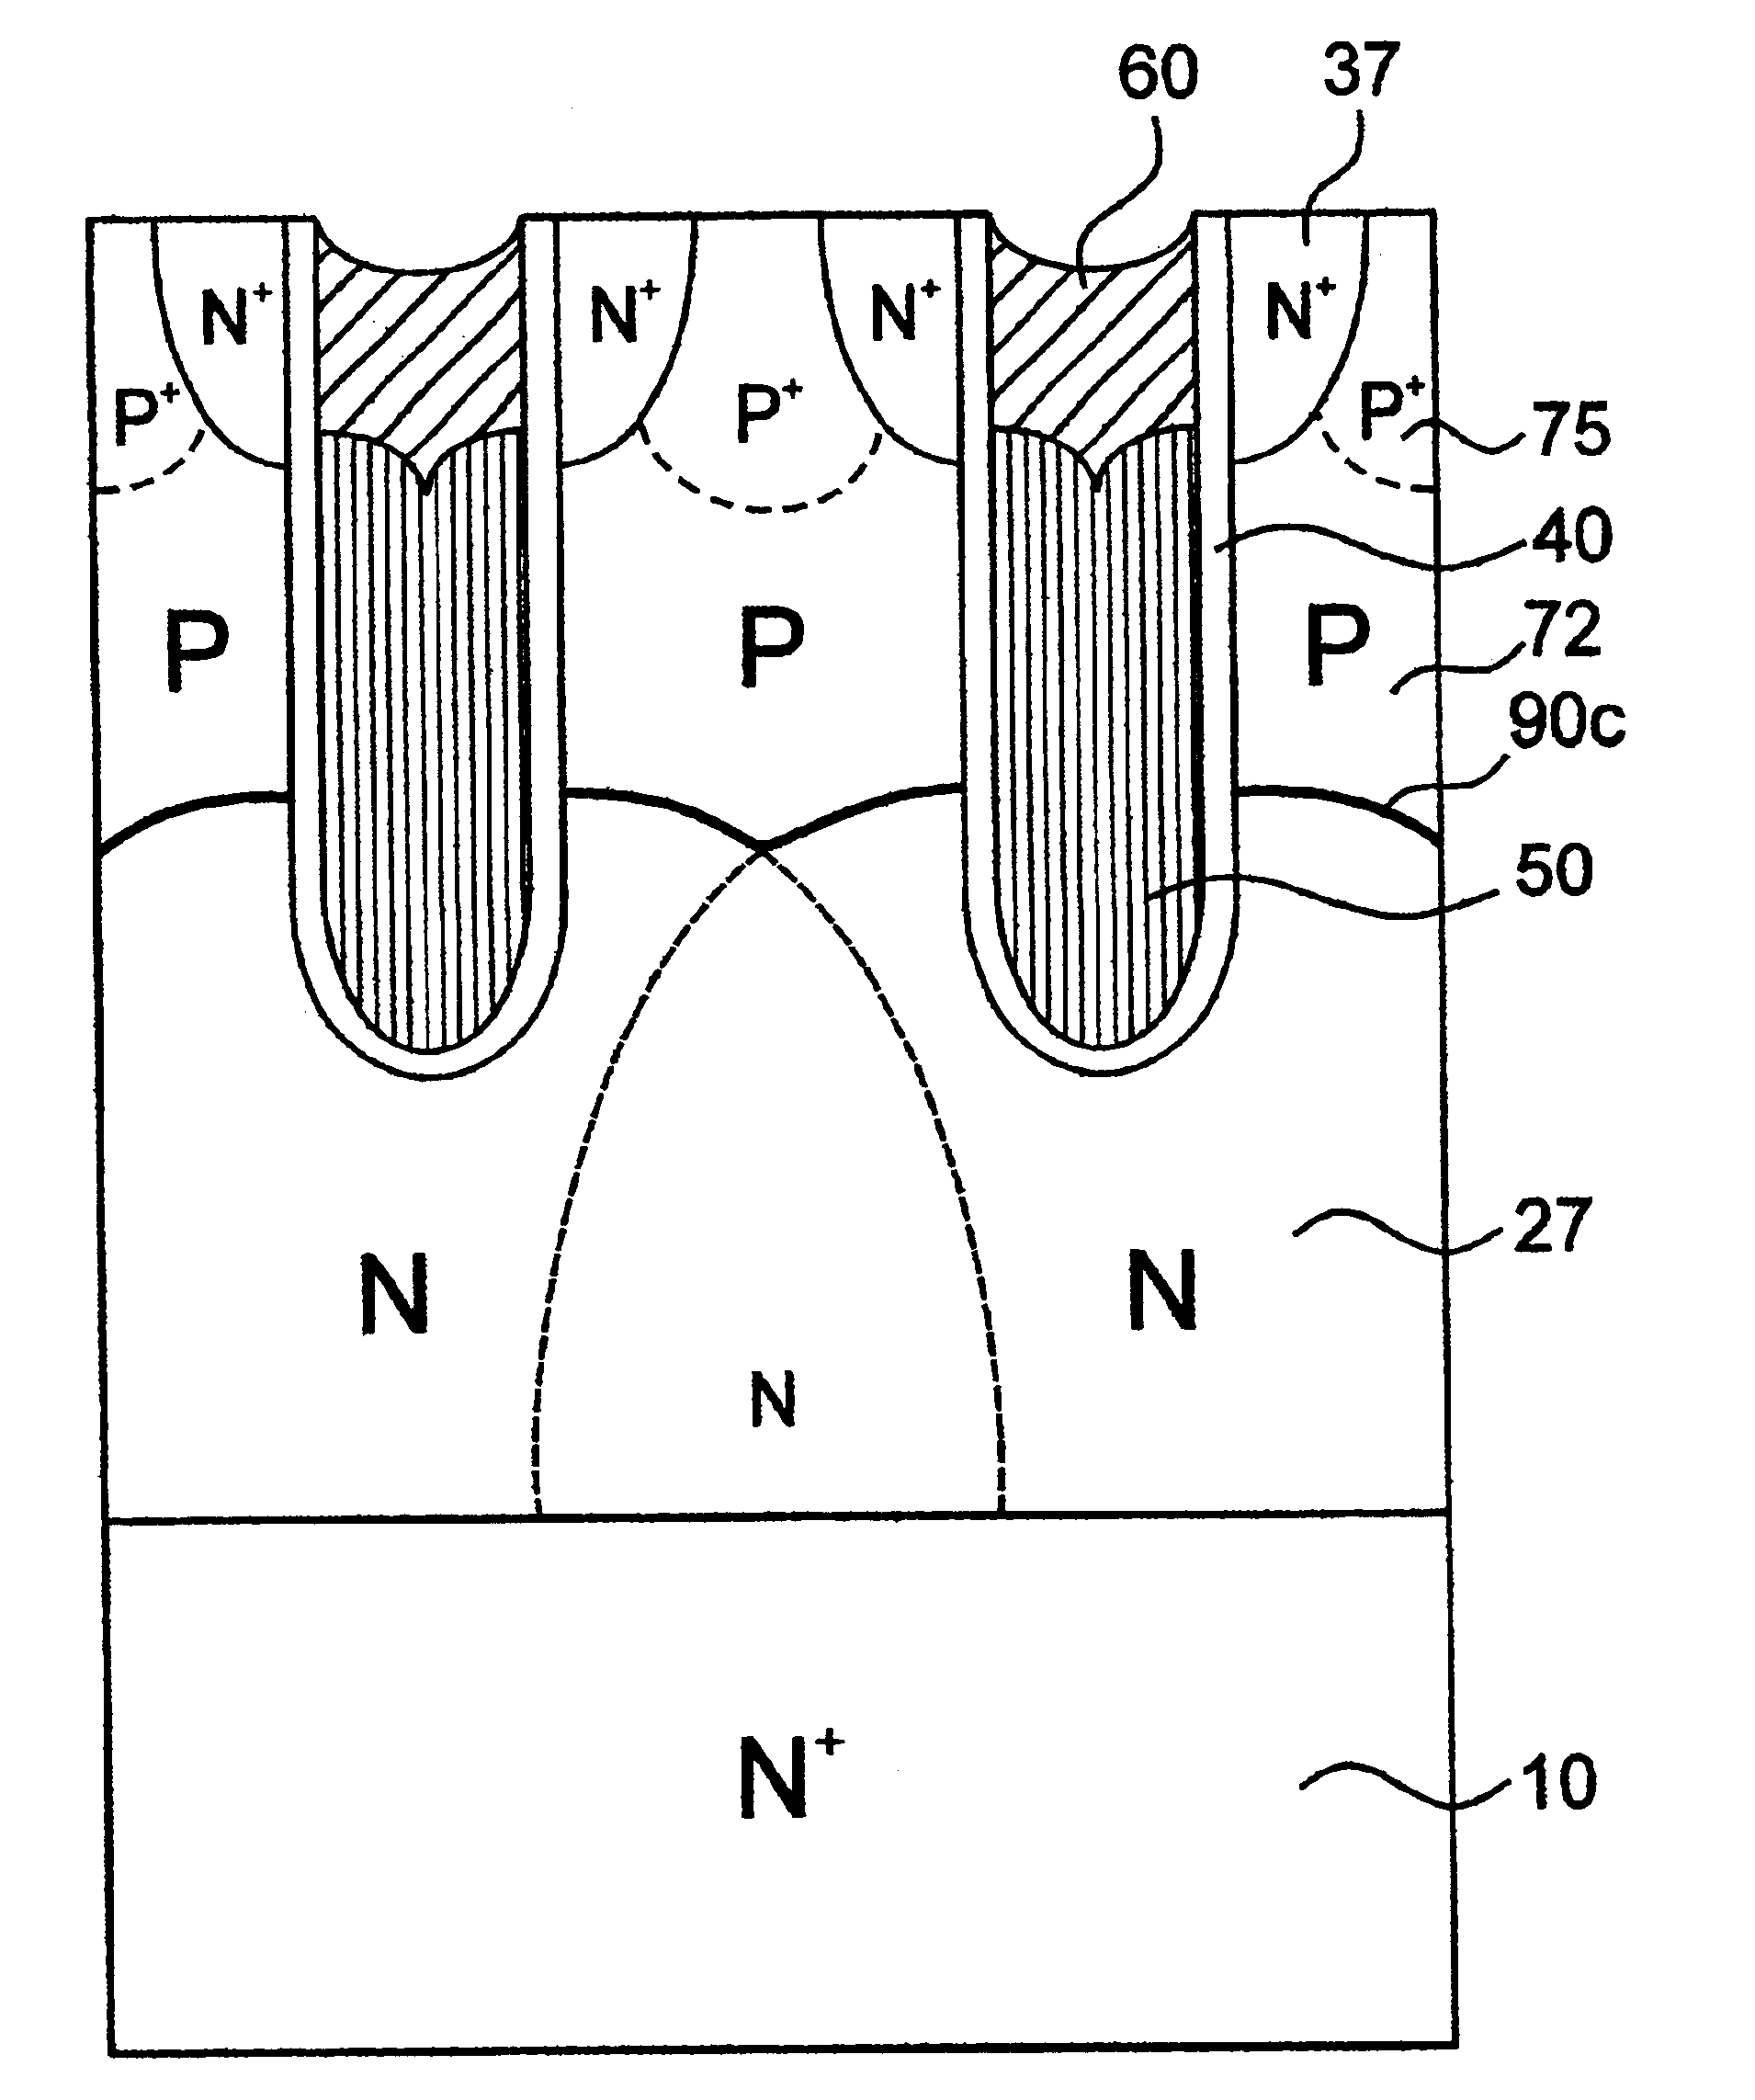 Low voltage high density trench-gated power device with uniformly doped channel and its edge termination technique